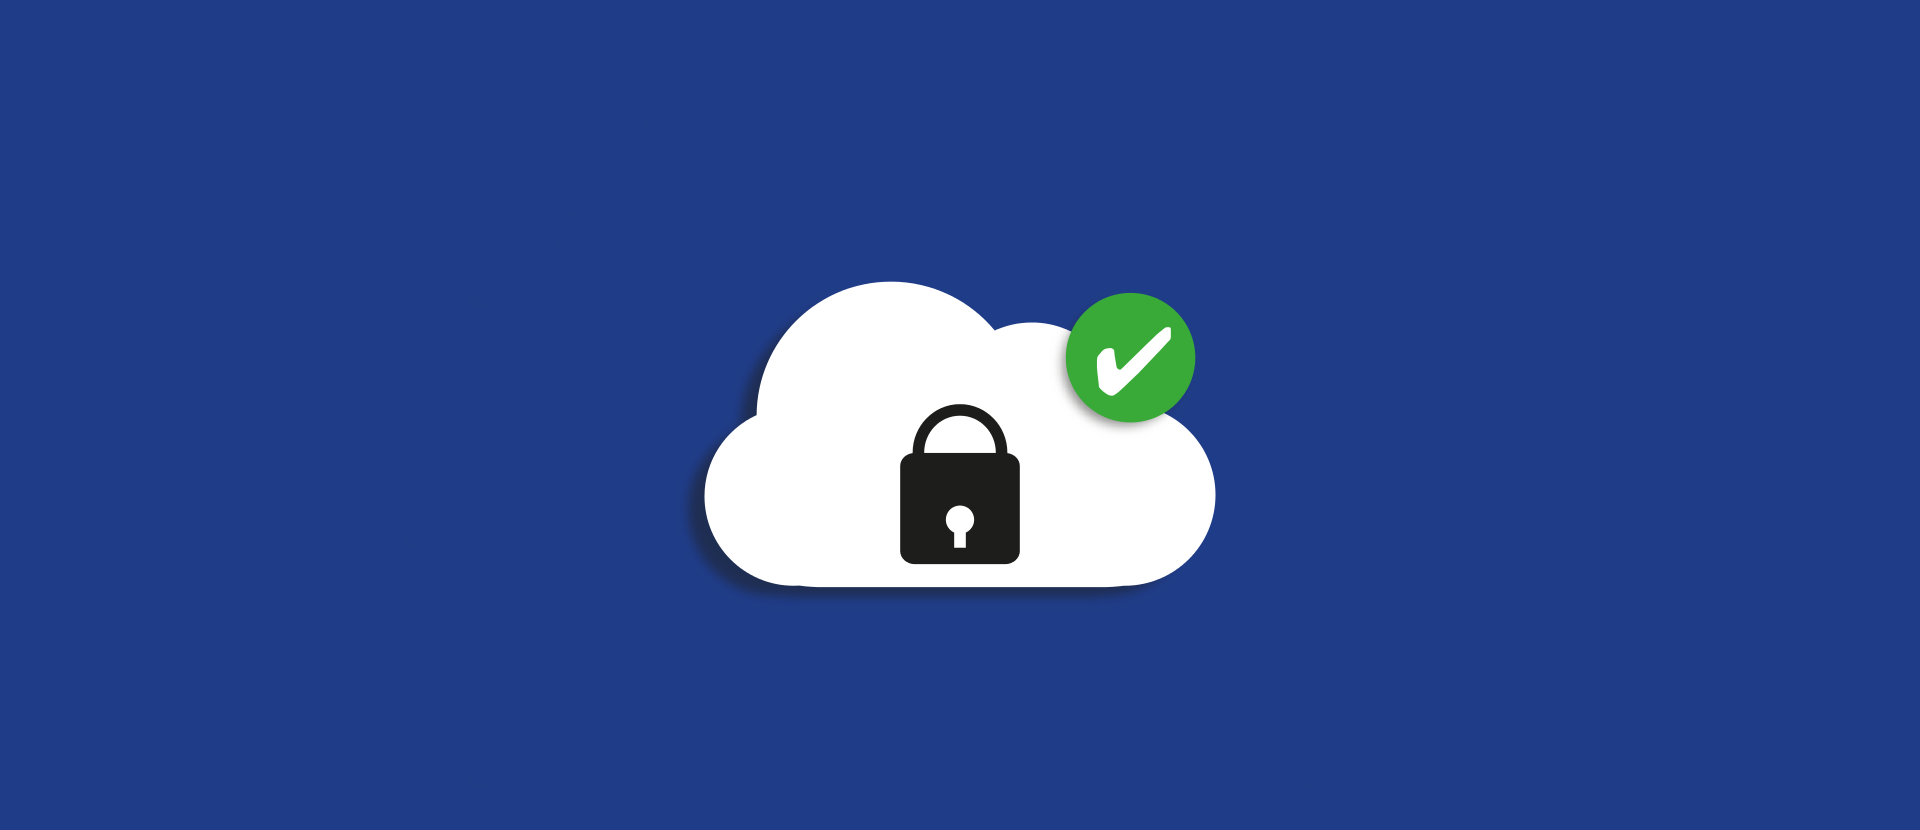 Cloud Services | Key Security Considerations<br>